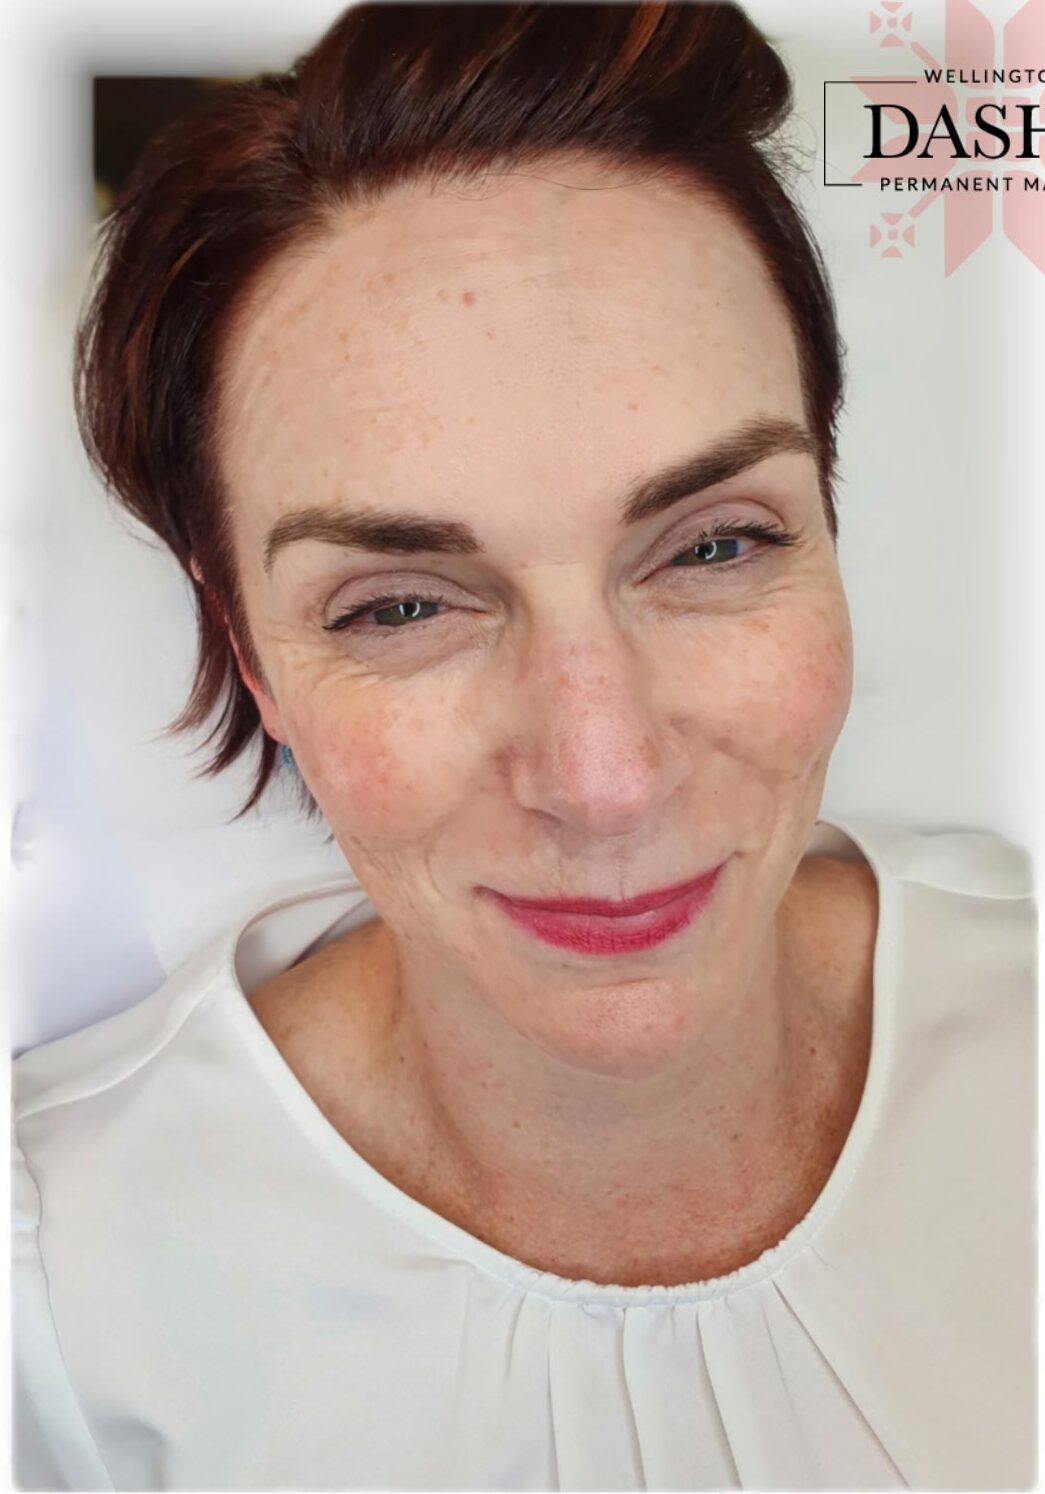 Brows Semi Permanent Makeup. Cosmetic and Mediical Tattoo by Dasha. Permanent makeup and reconstructive tattoo, scalp micro-pigmentation in Christchurch, New Zealand